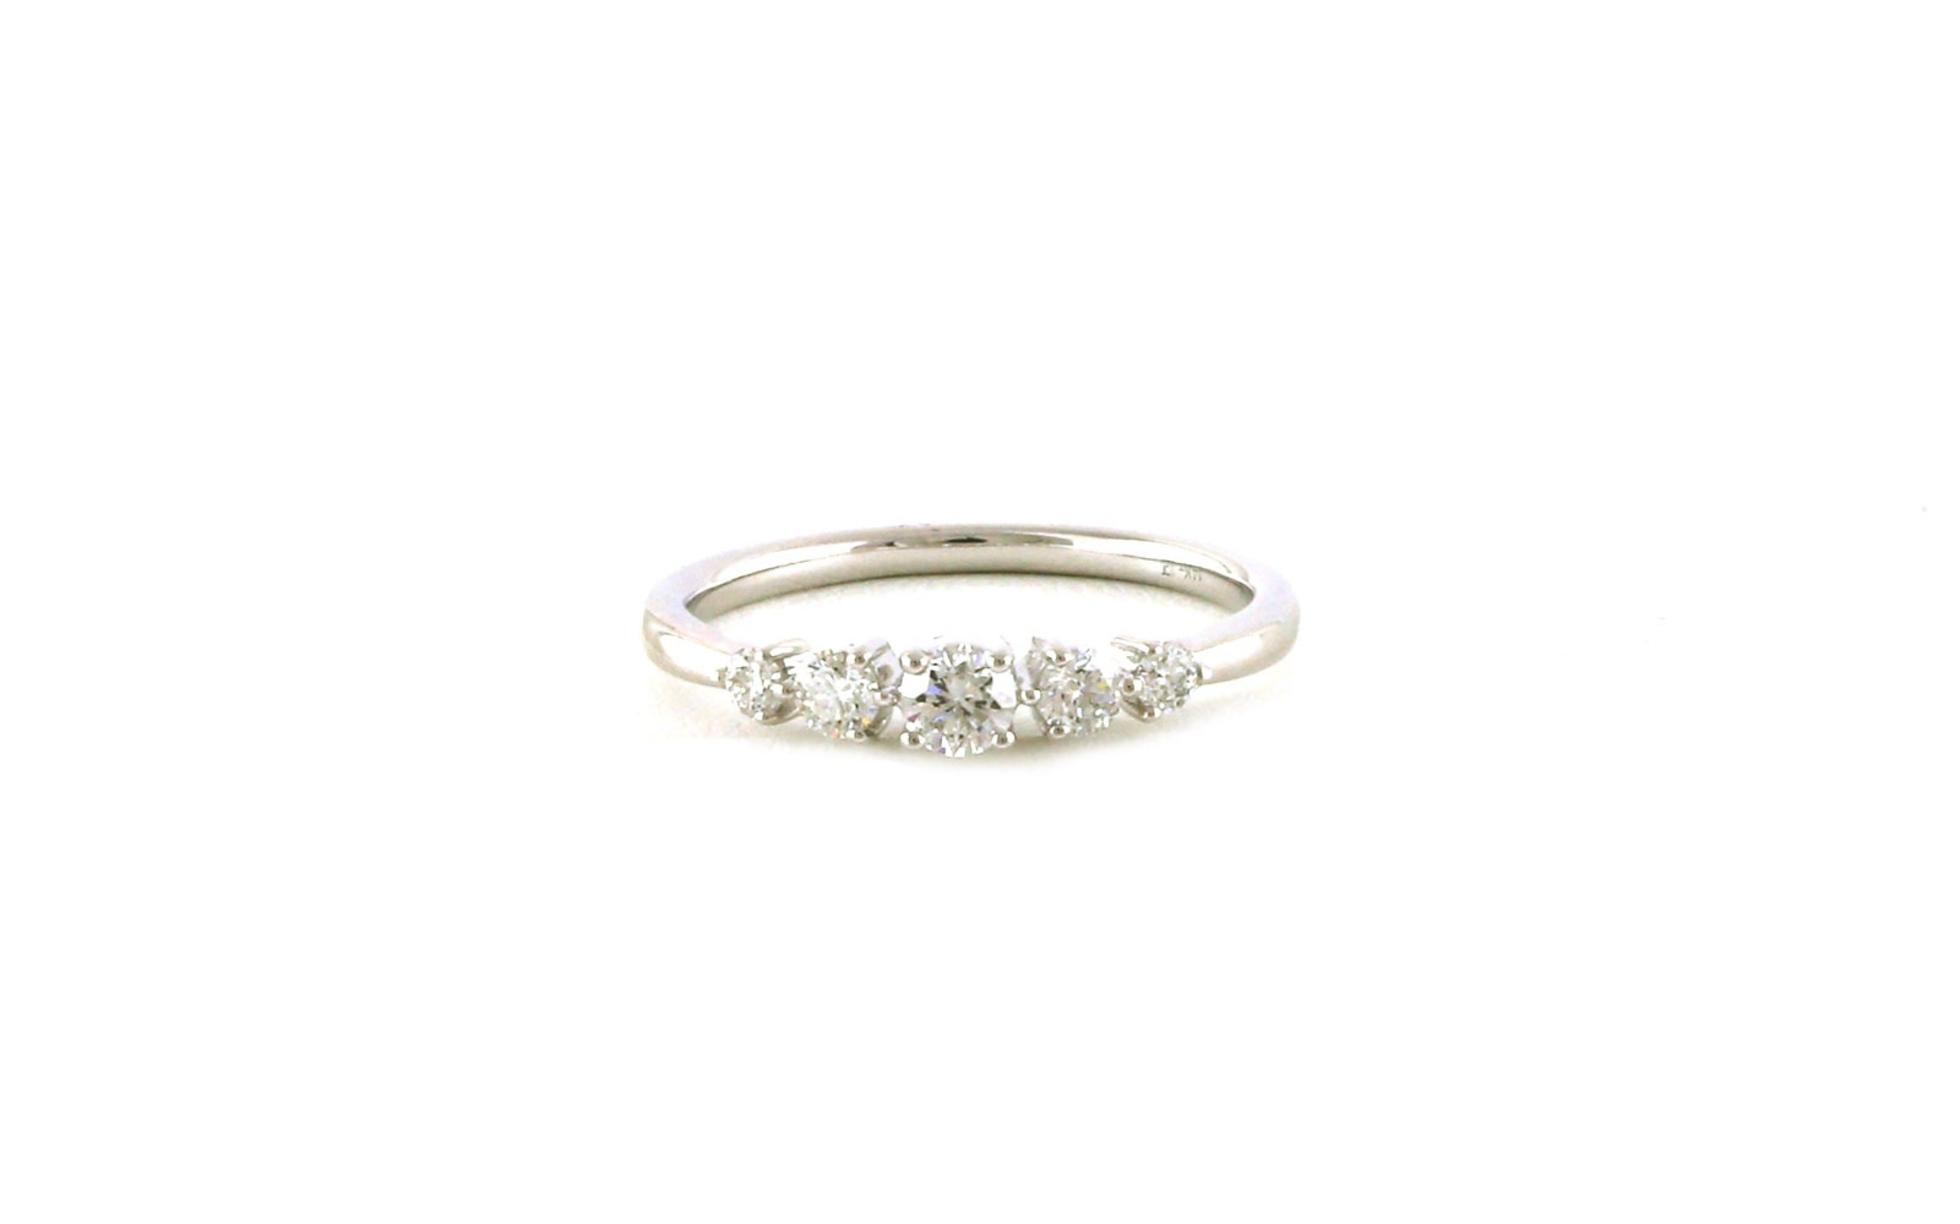 5-Stone Graduated Diamond Ring in White Gold (0.42cts TWT)